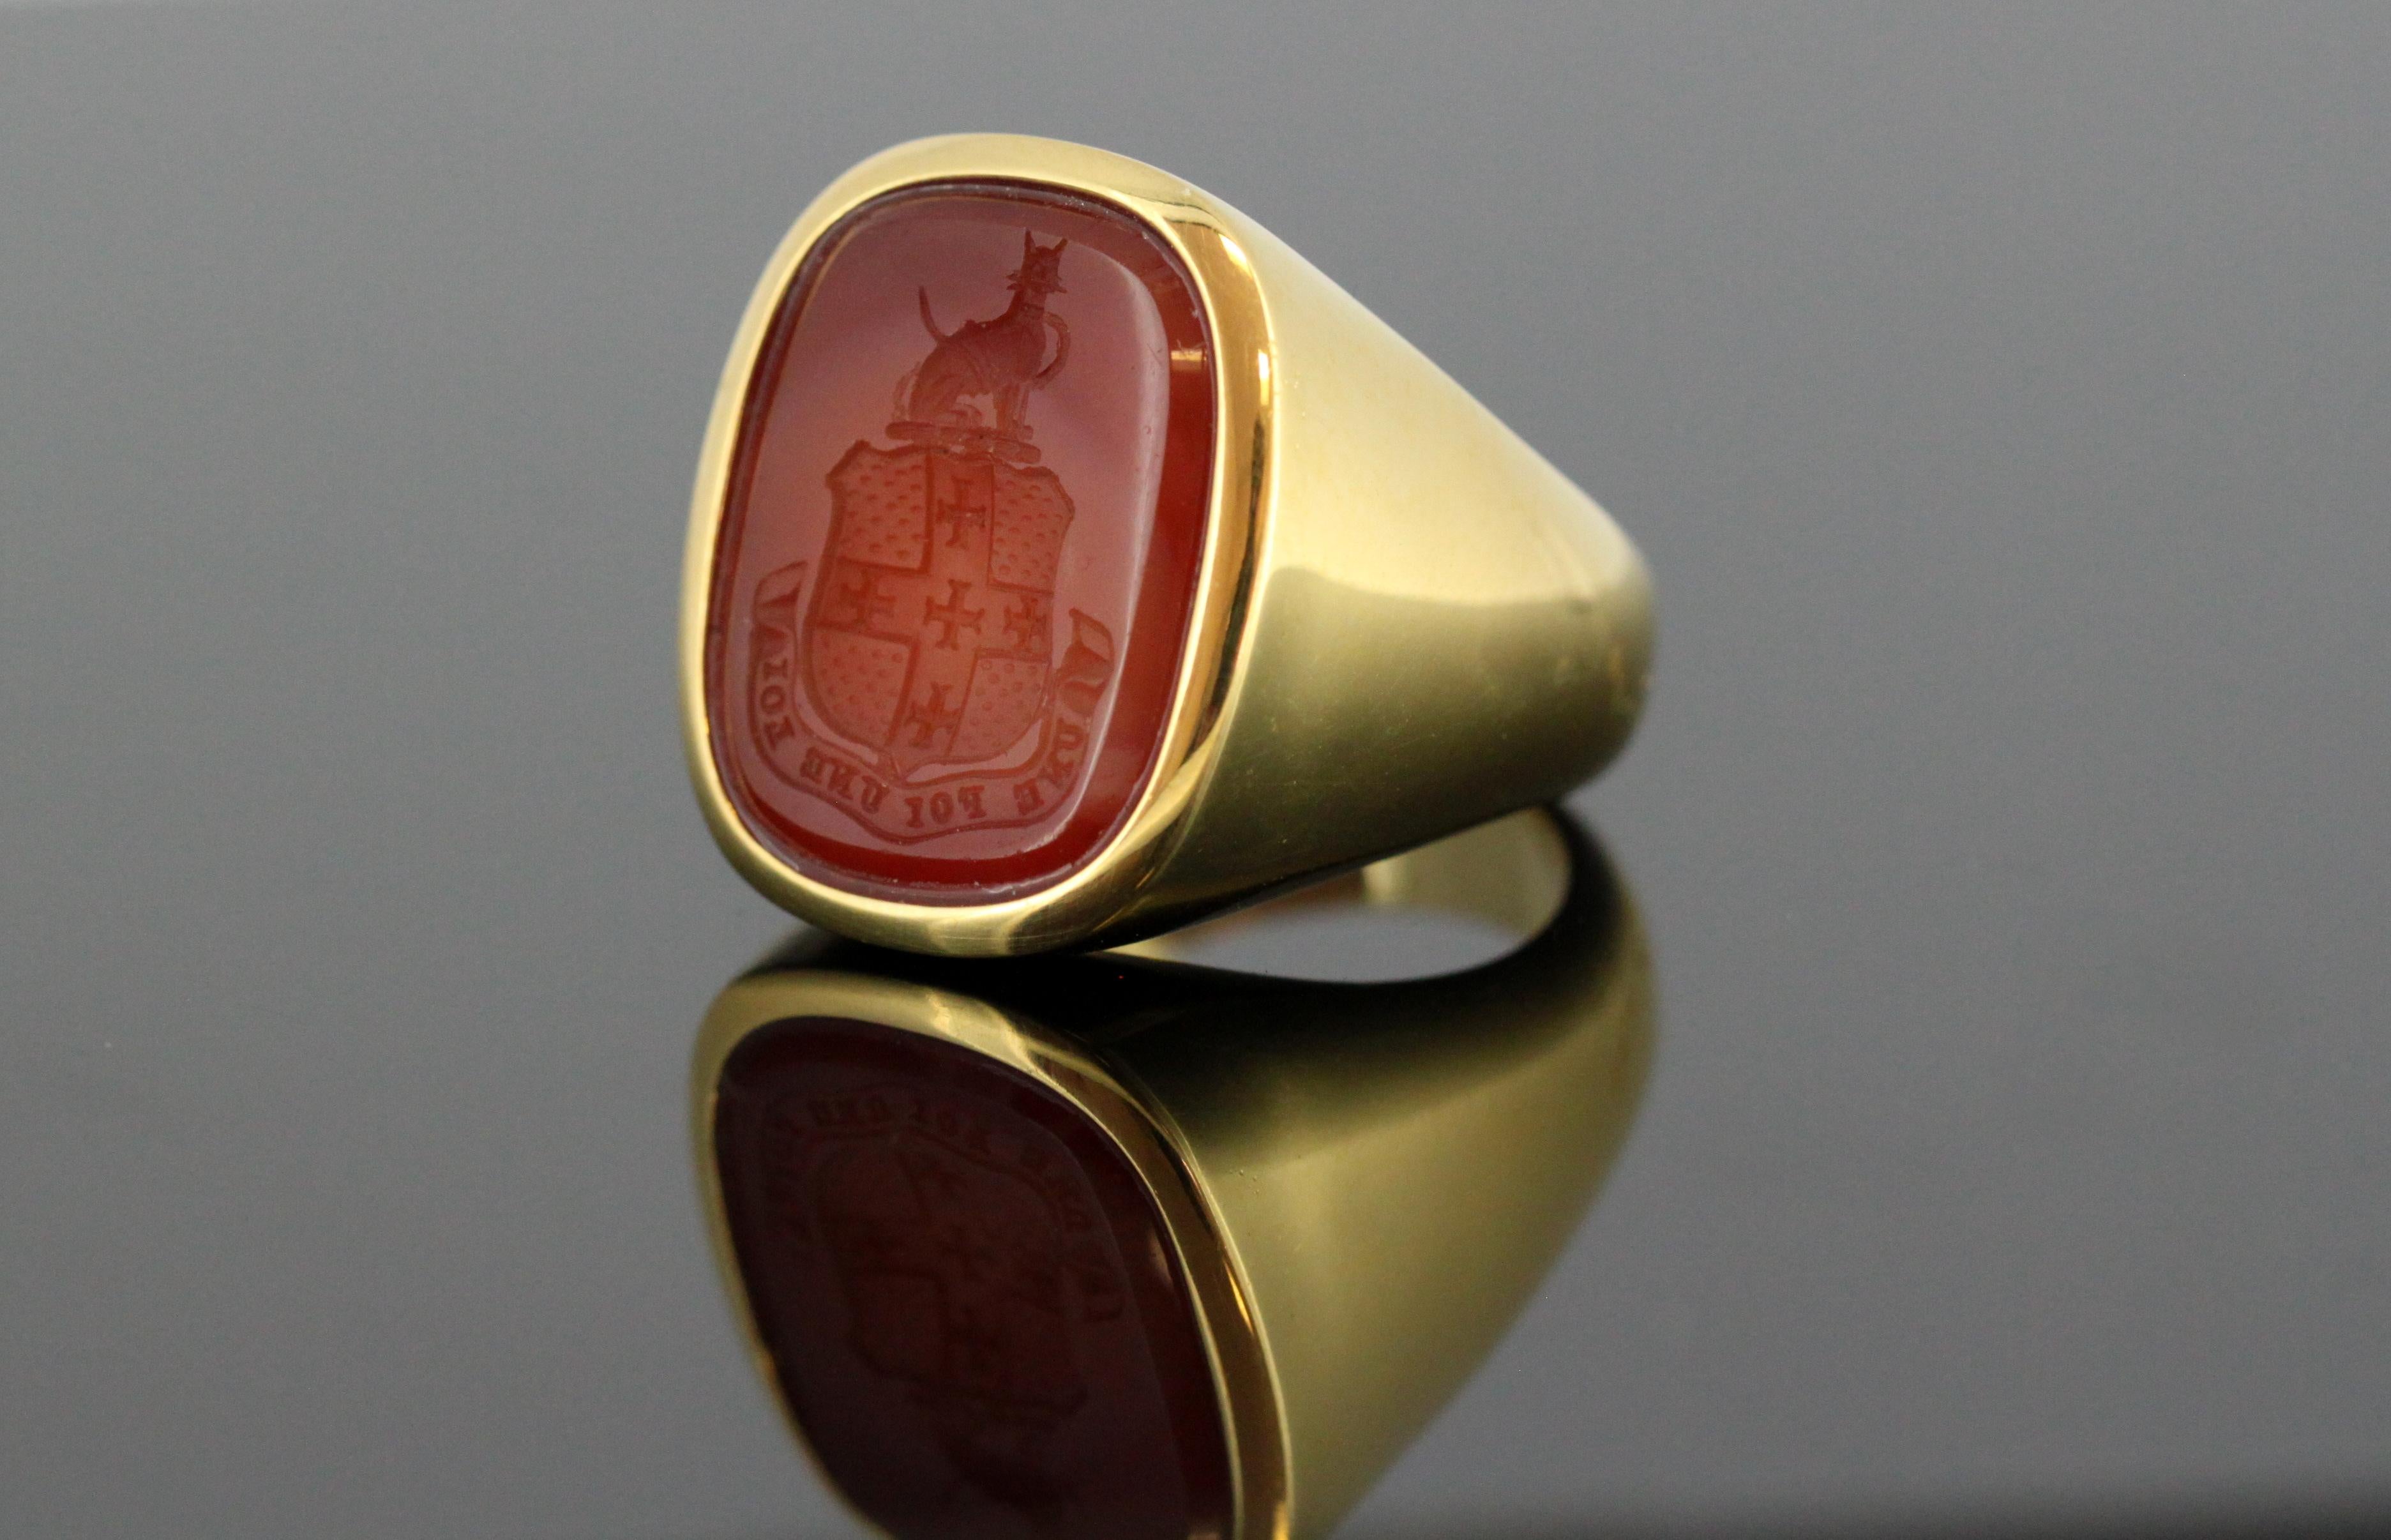 Vintage 18k yellow gold carnelian seal ring. The seal has 